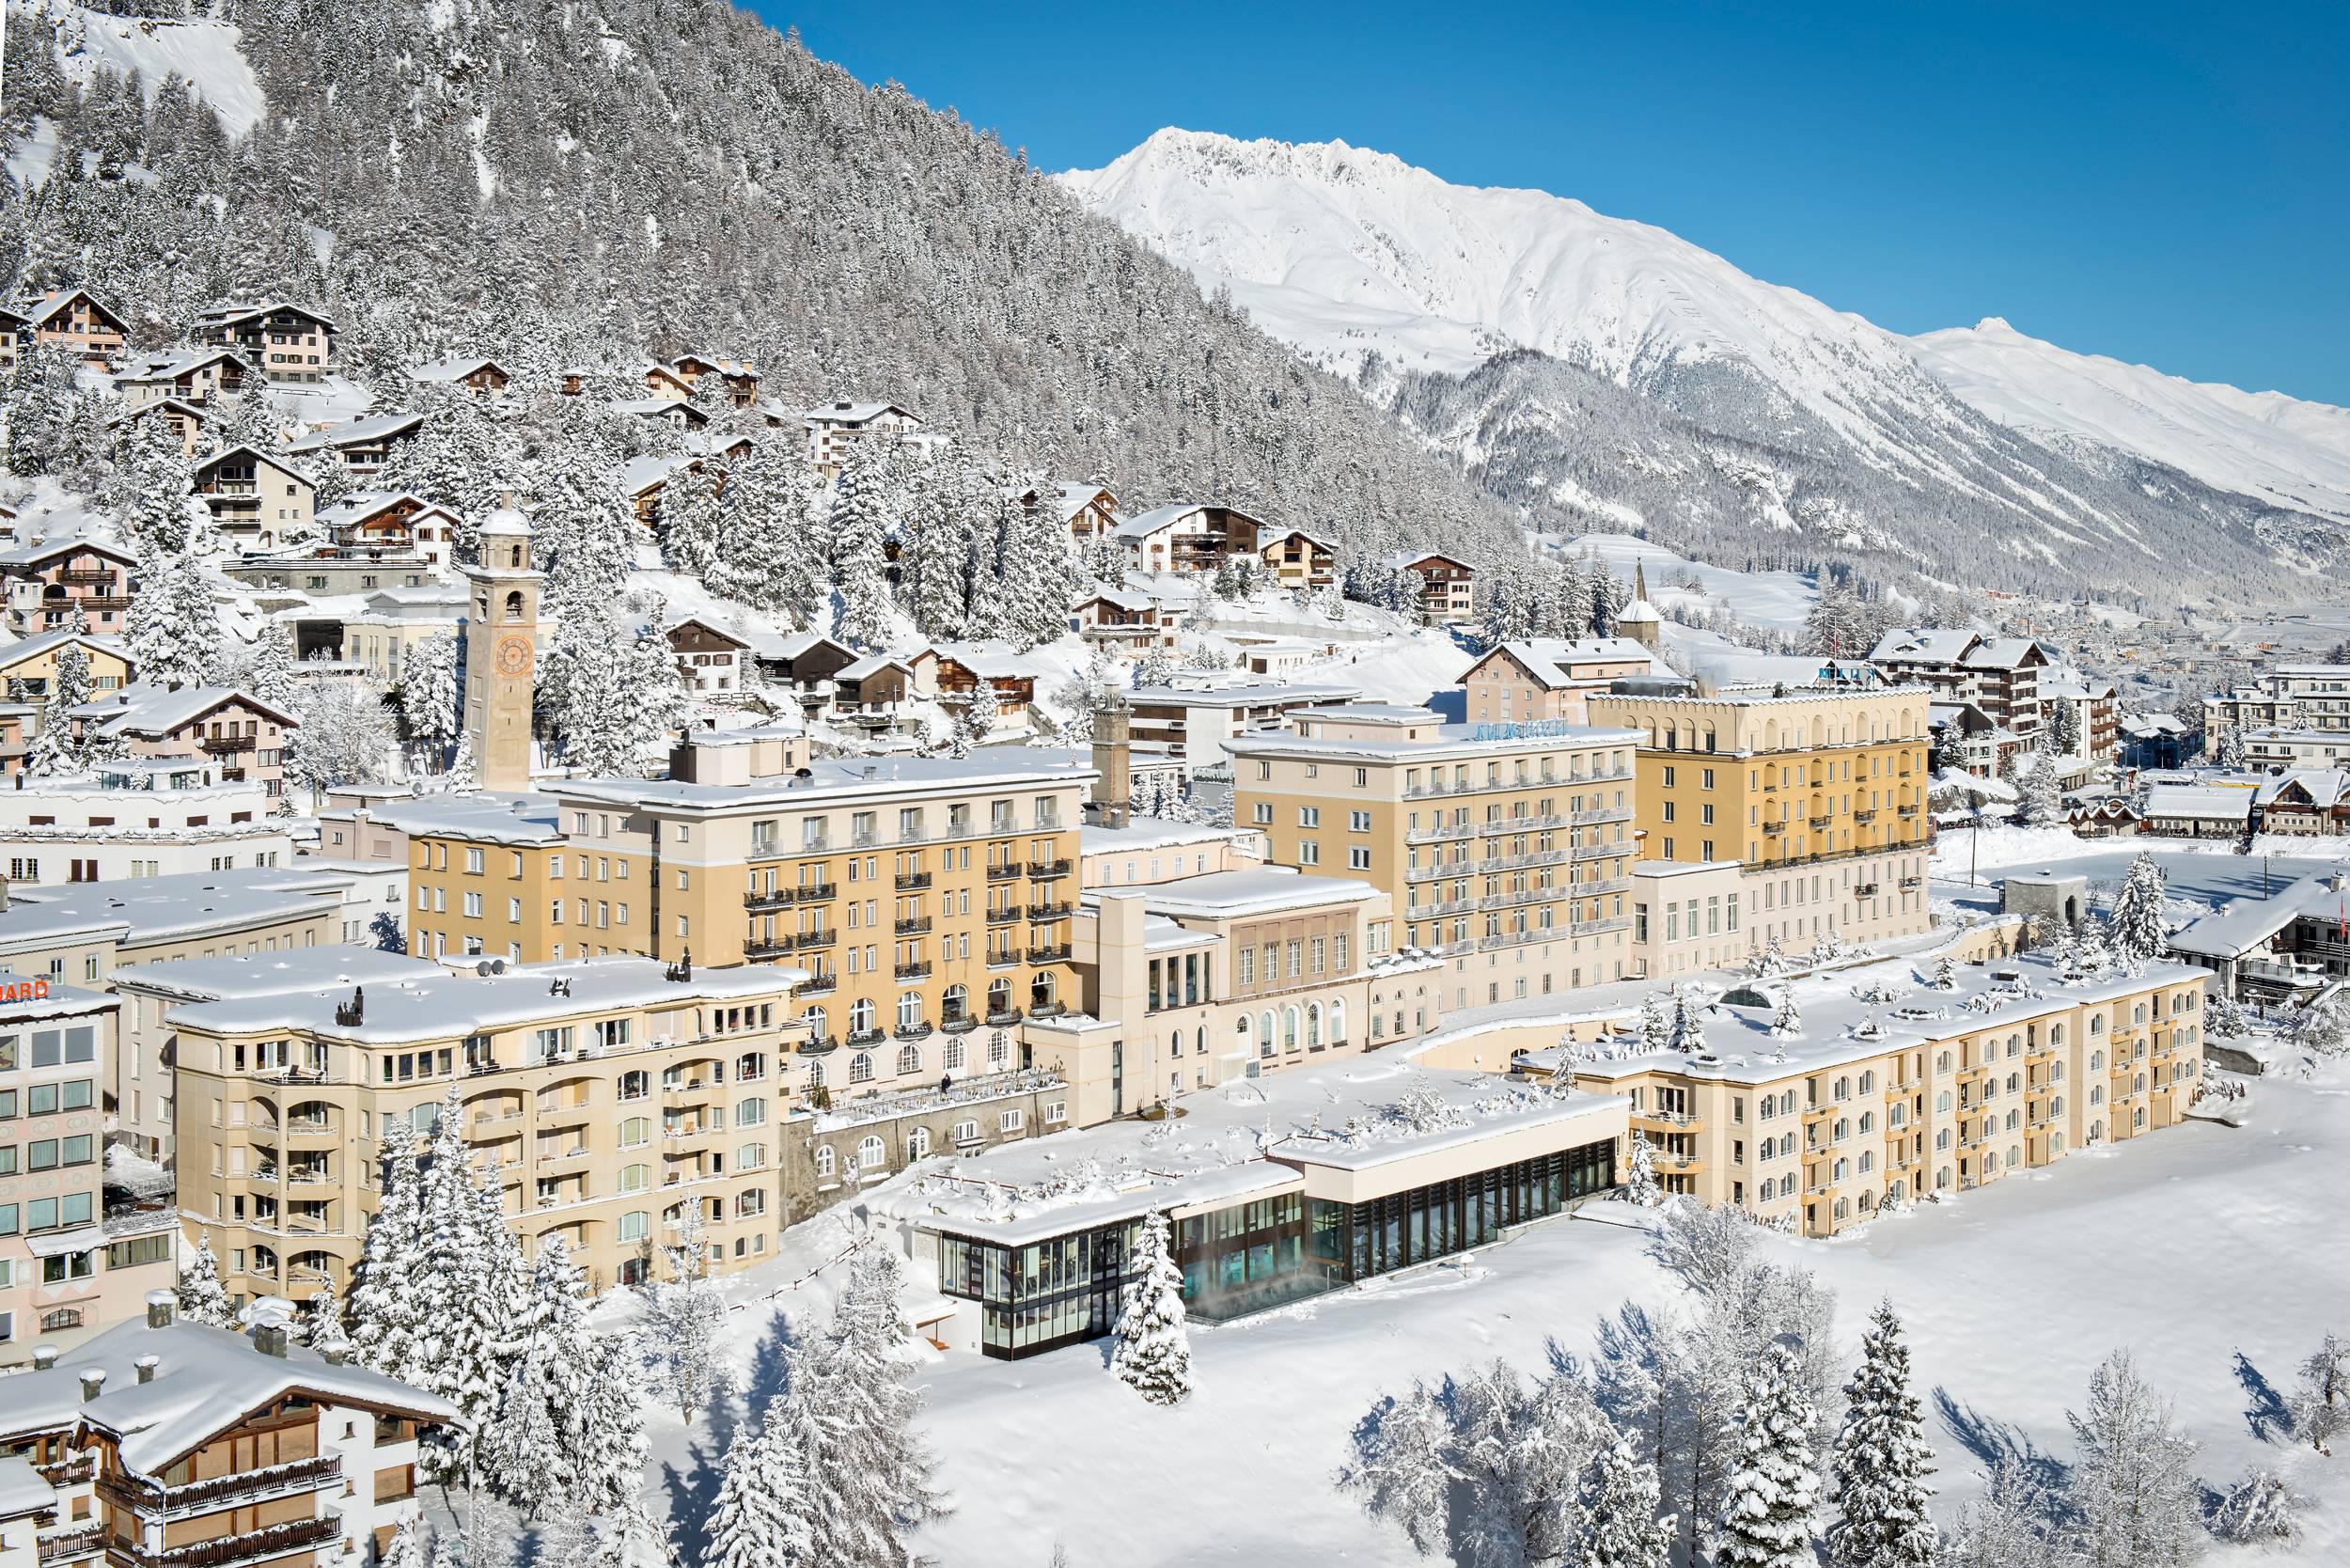 Gstaad And St. Moritz: Movie Stars, Mountains, And More